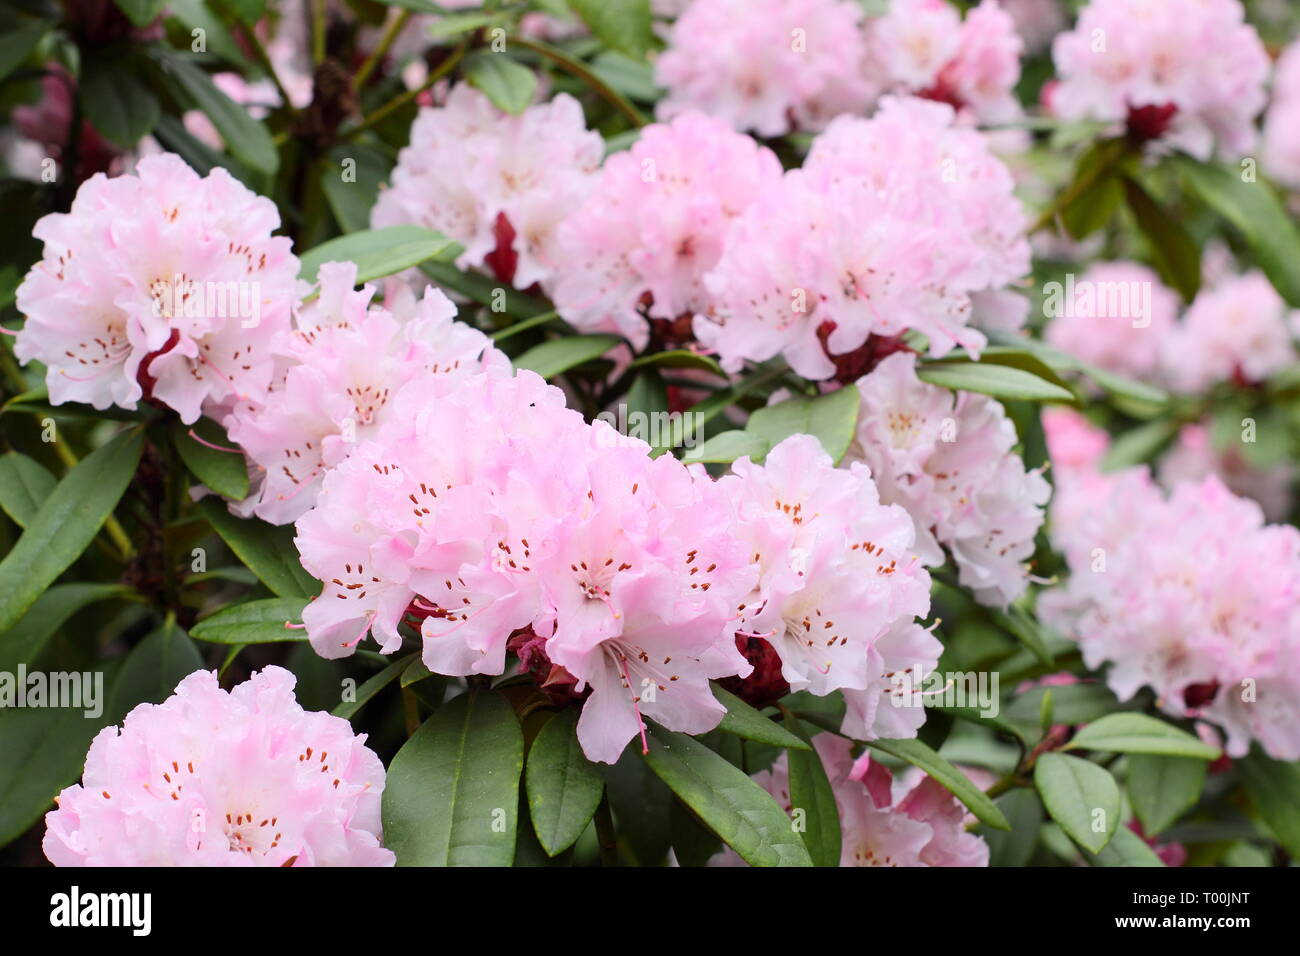 Rhododendron 'Christmas Cheer'. Blooms of early flowering rhododendron, 'Christmas Cheer' in an English garden -  late February, UK Stock Photo